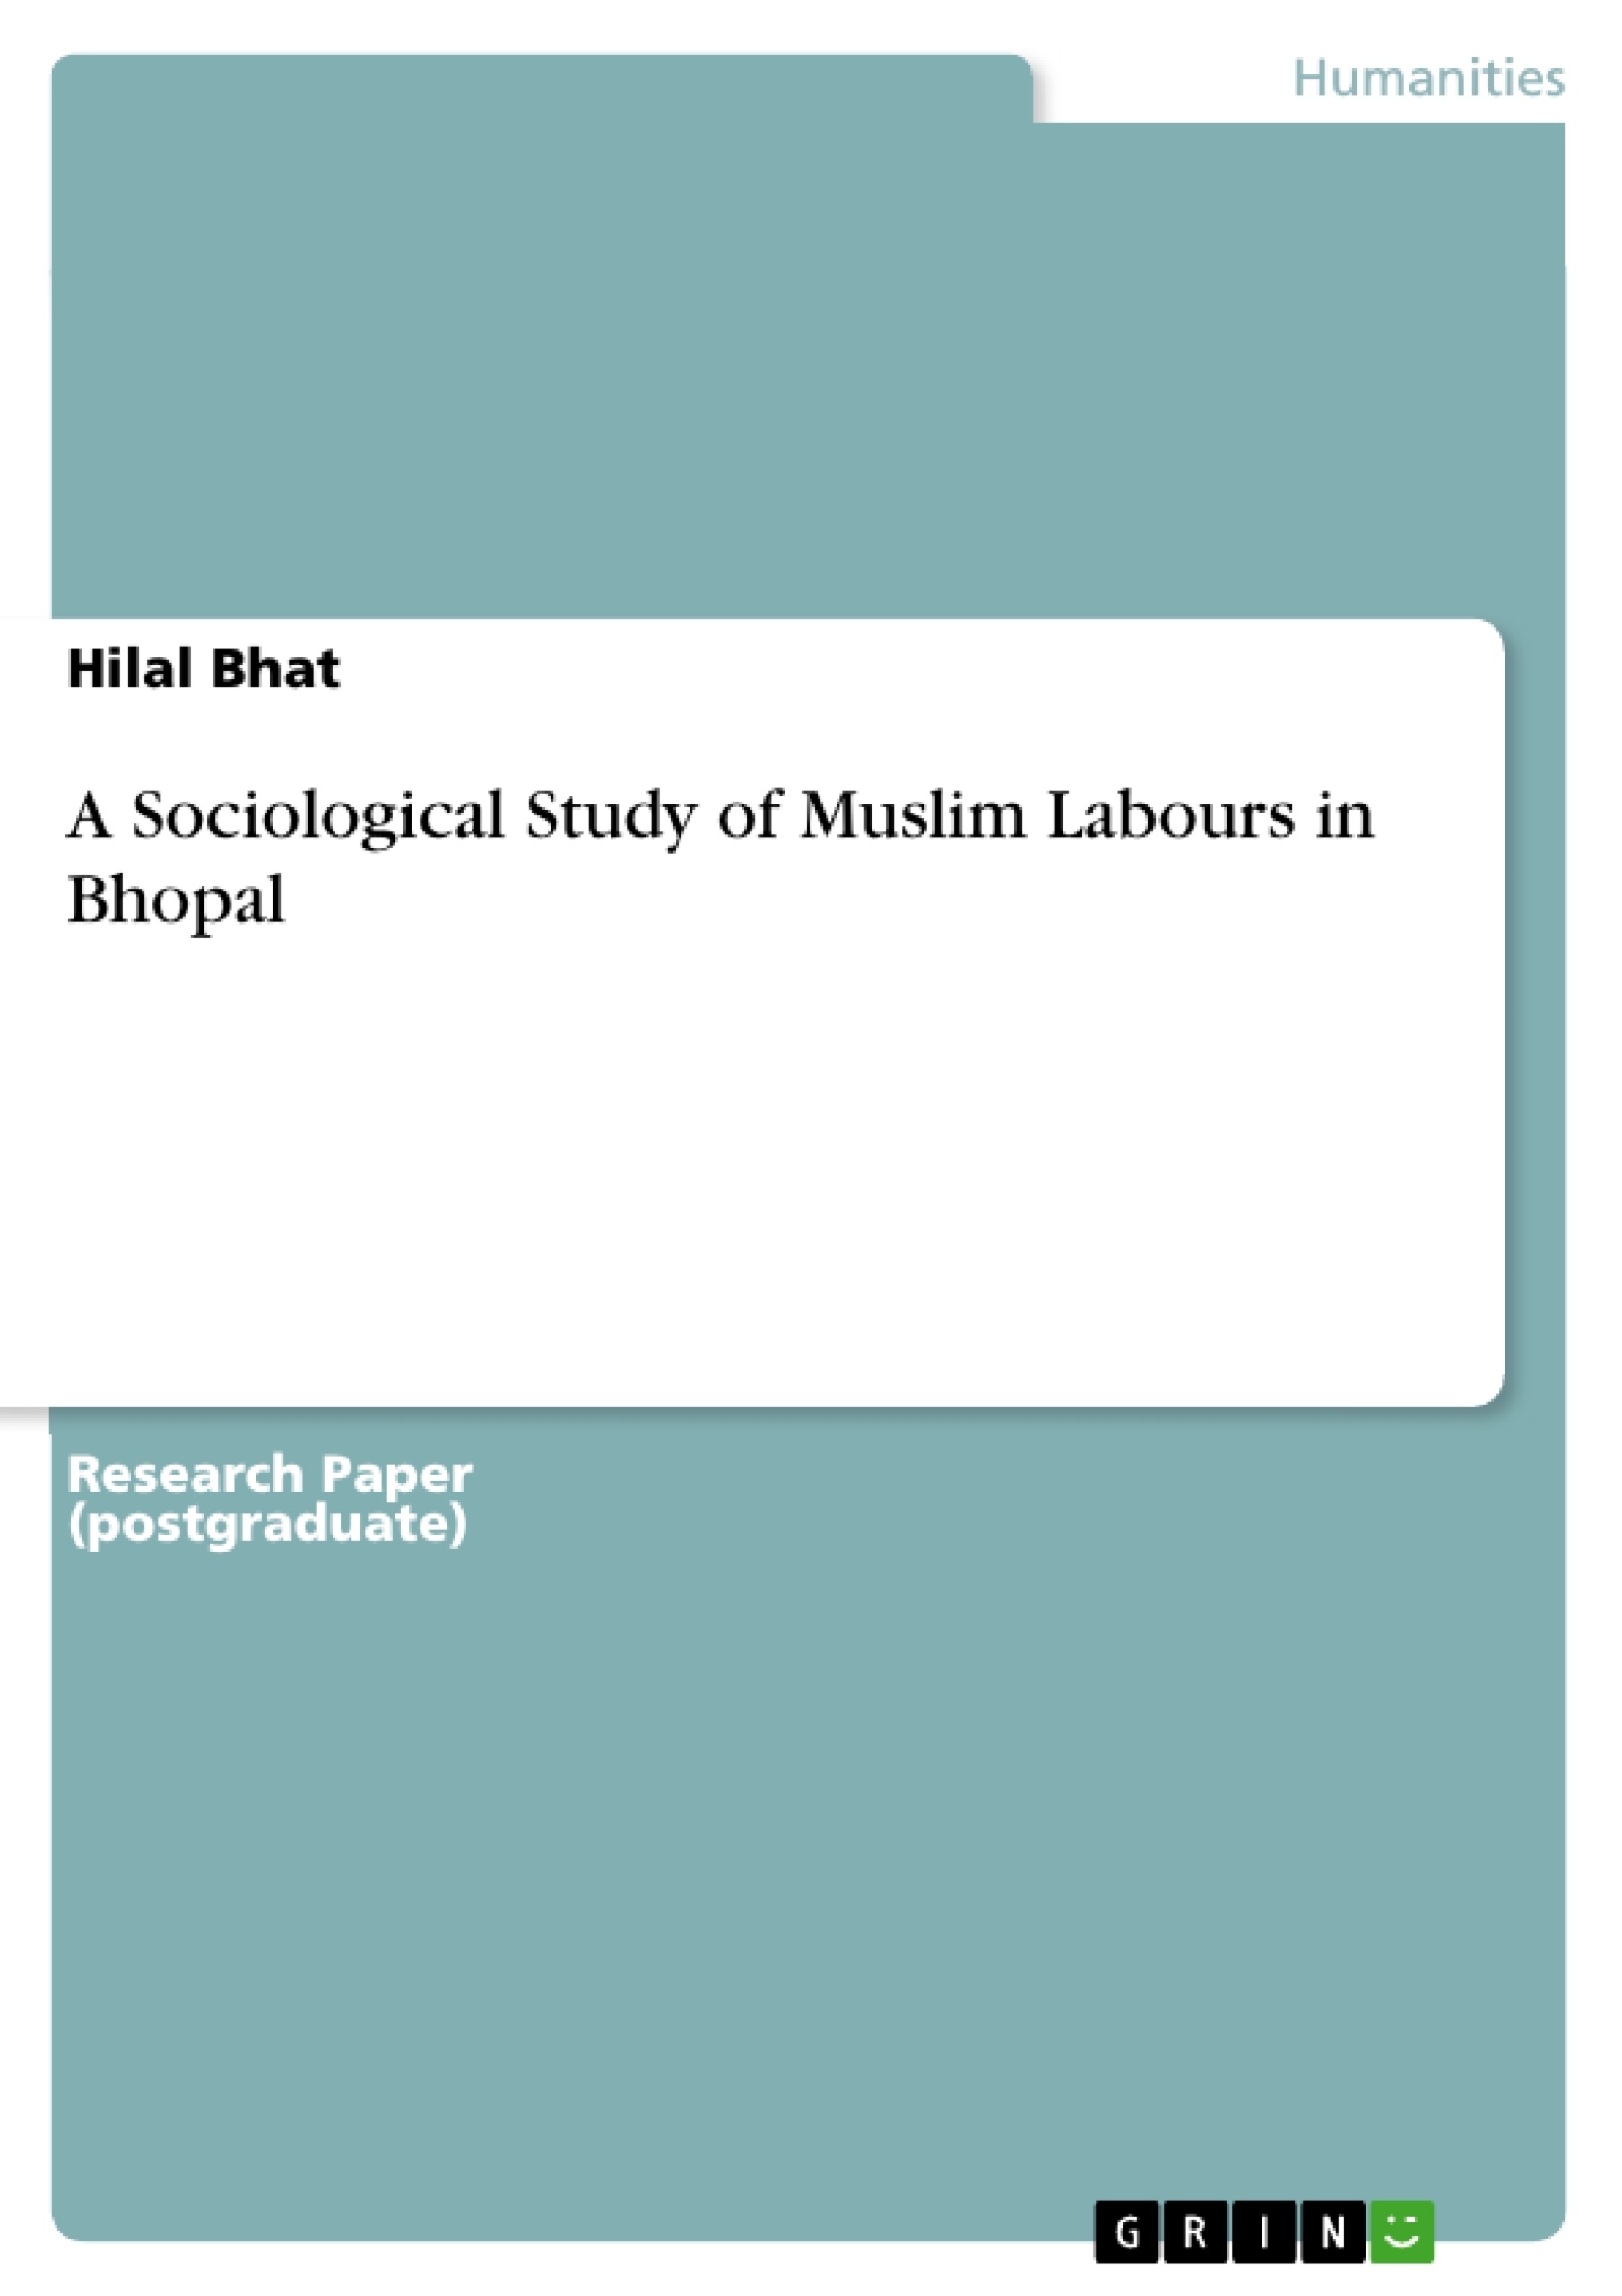 Title: A Sociological Study of Muslim Labours in Bhopal